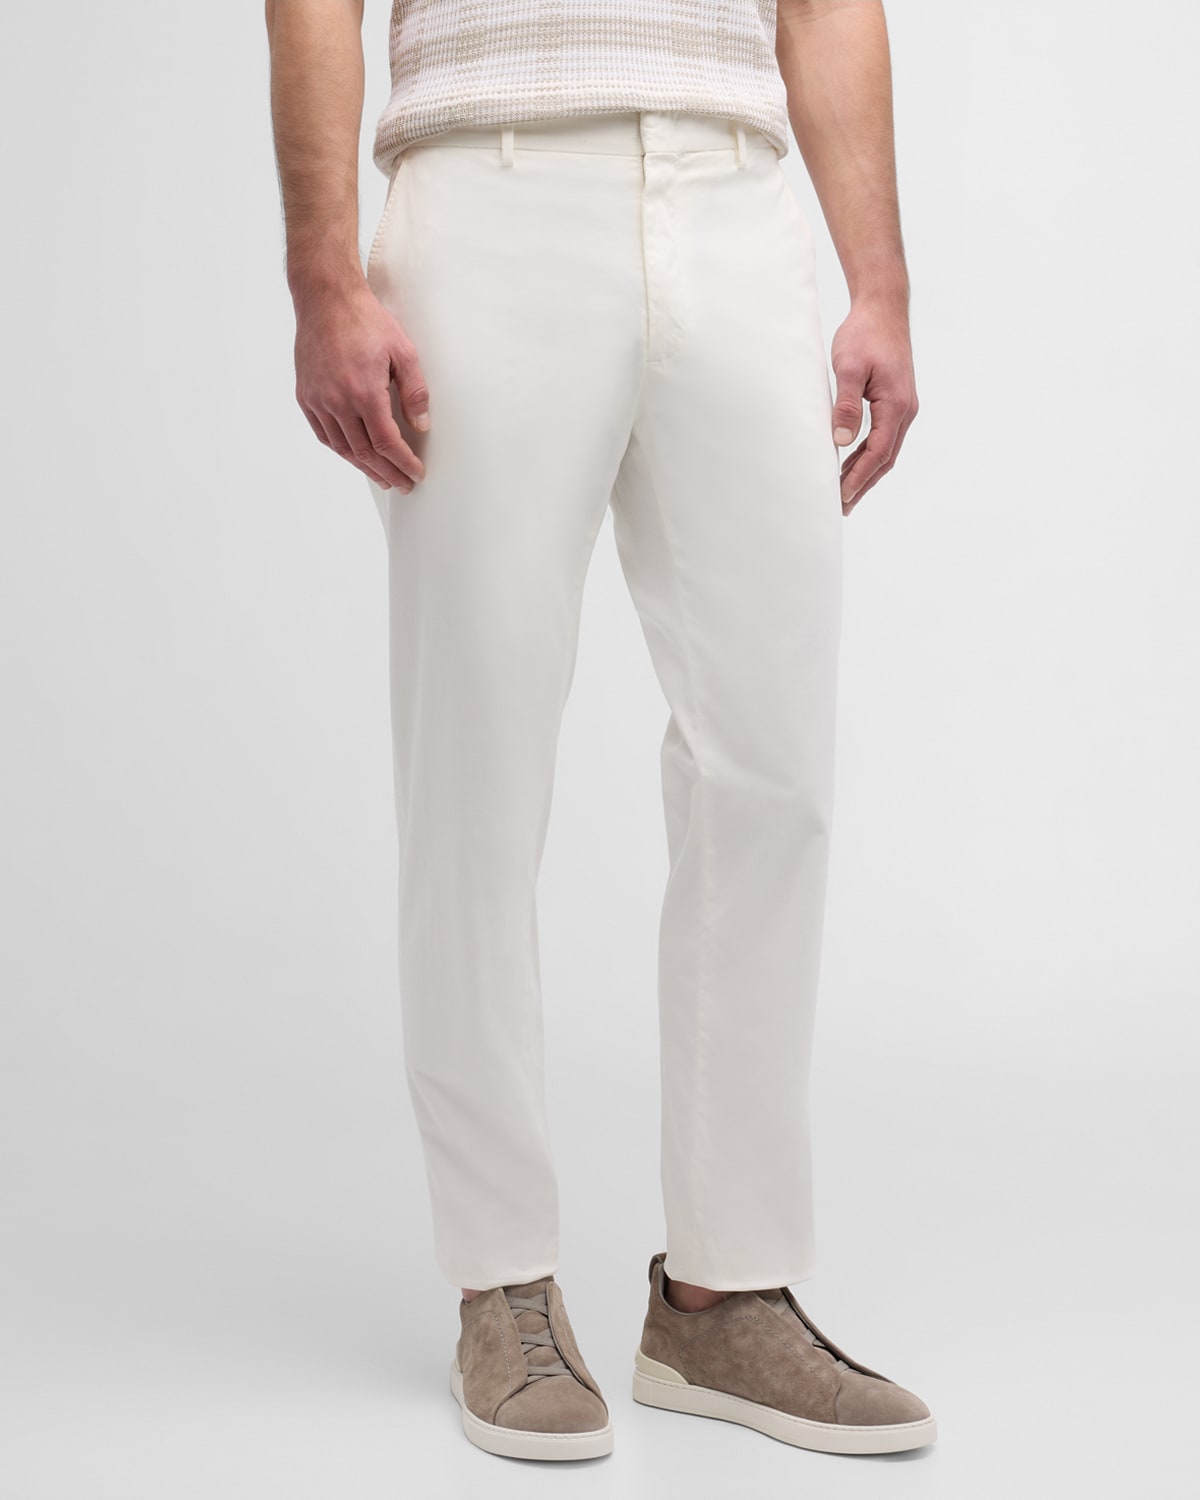 Zegna Men's Slim Flat-front Pants In White Solid